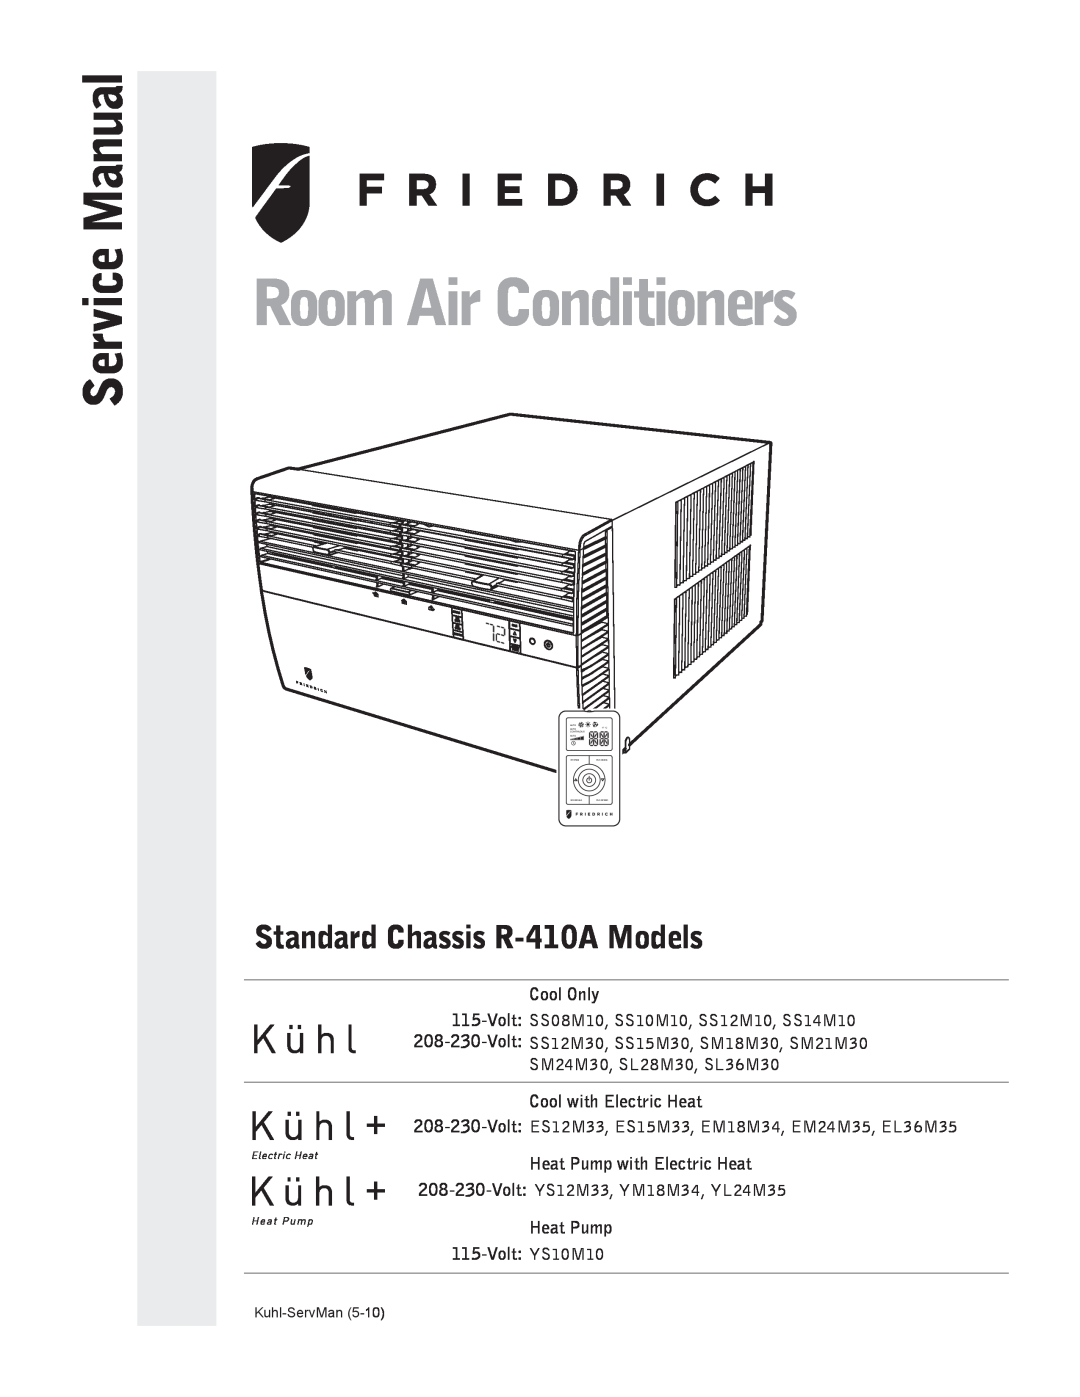 Friedrich service manual R-410AModels, Cool Only, Hazardous Duty Room Air Conditioner, Last character may vary 